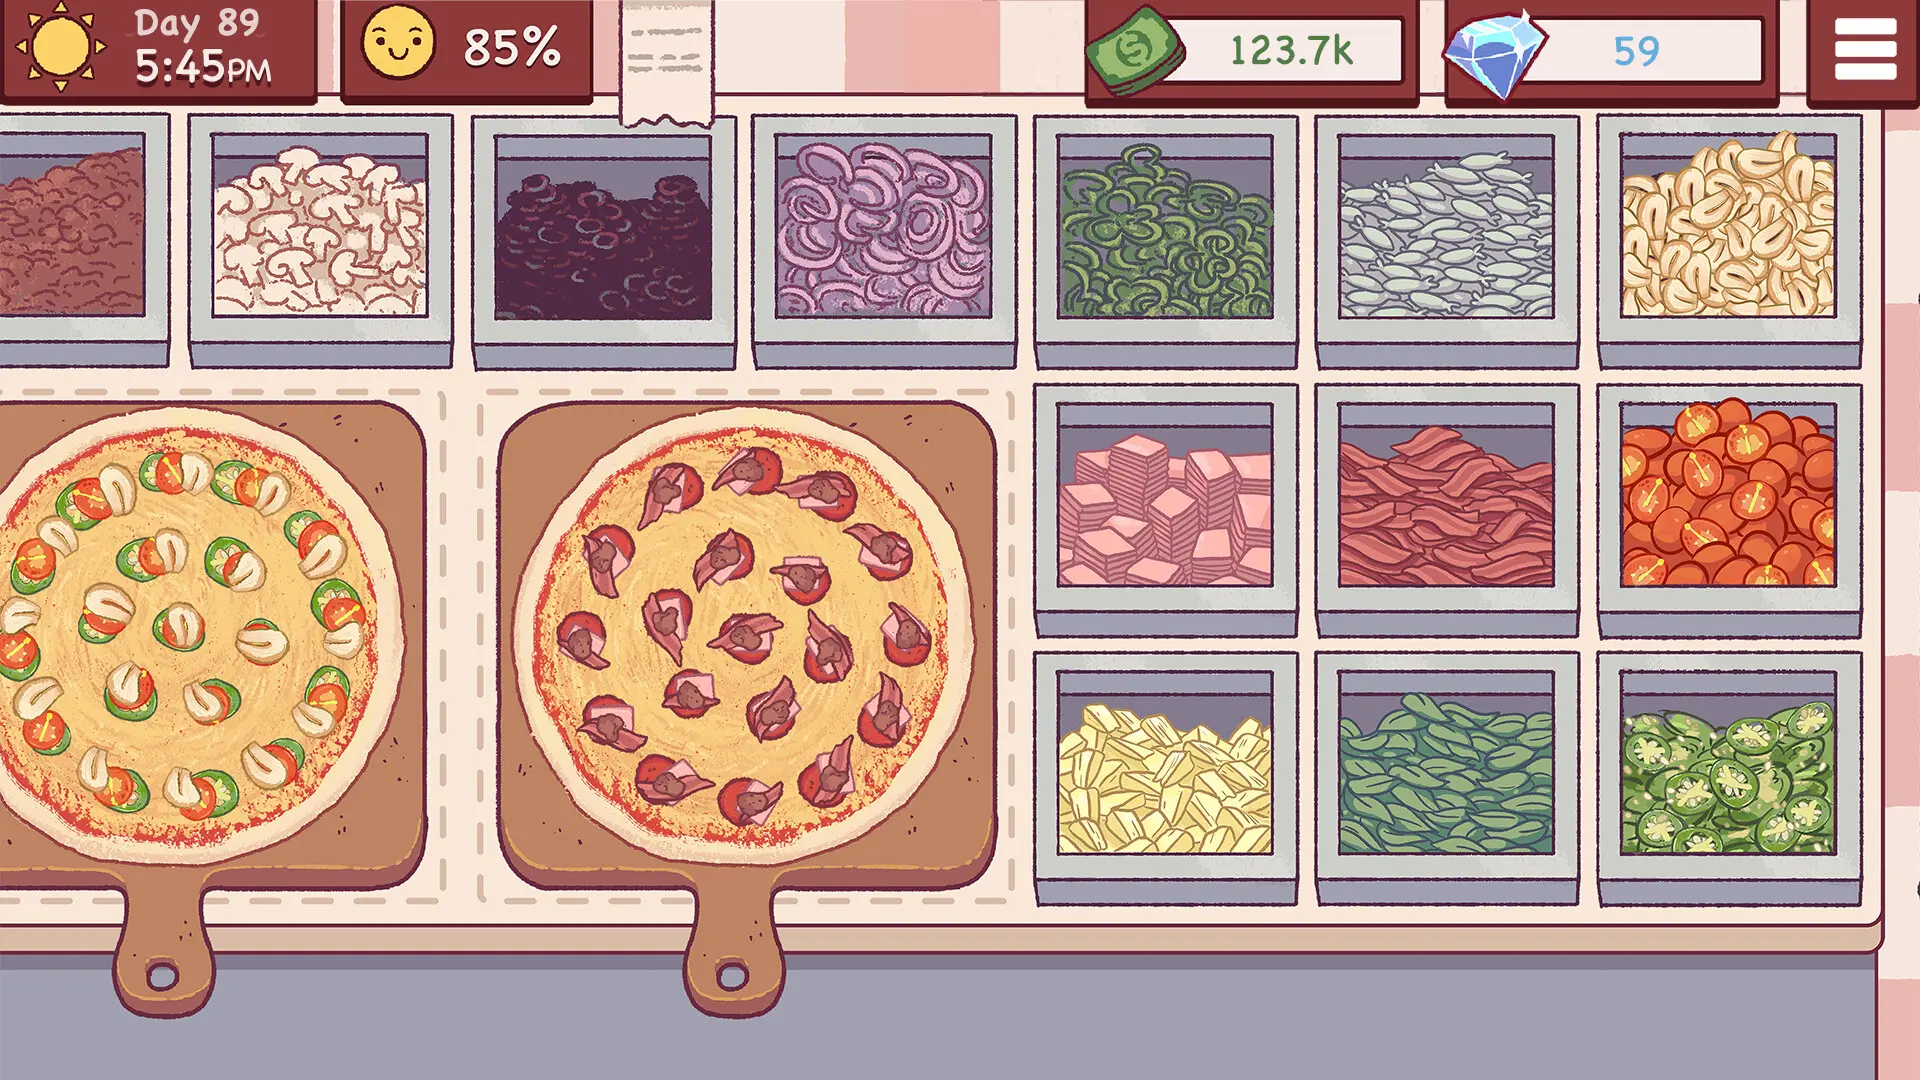 good pizza great pizza game - Is Good Pizza, Great Pizza a good game